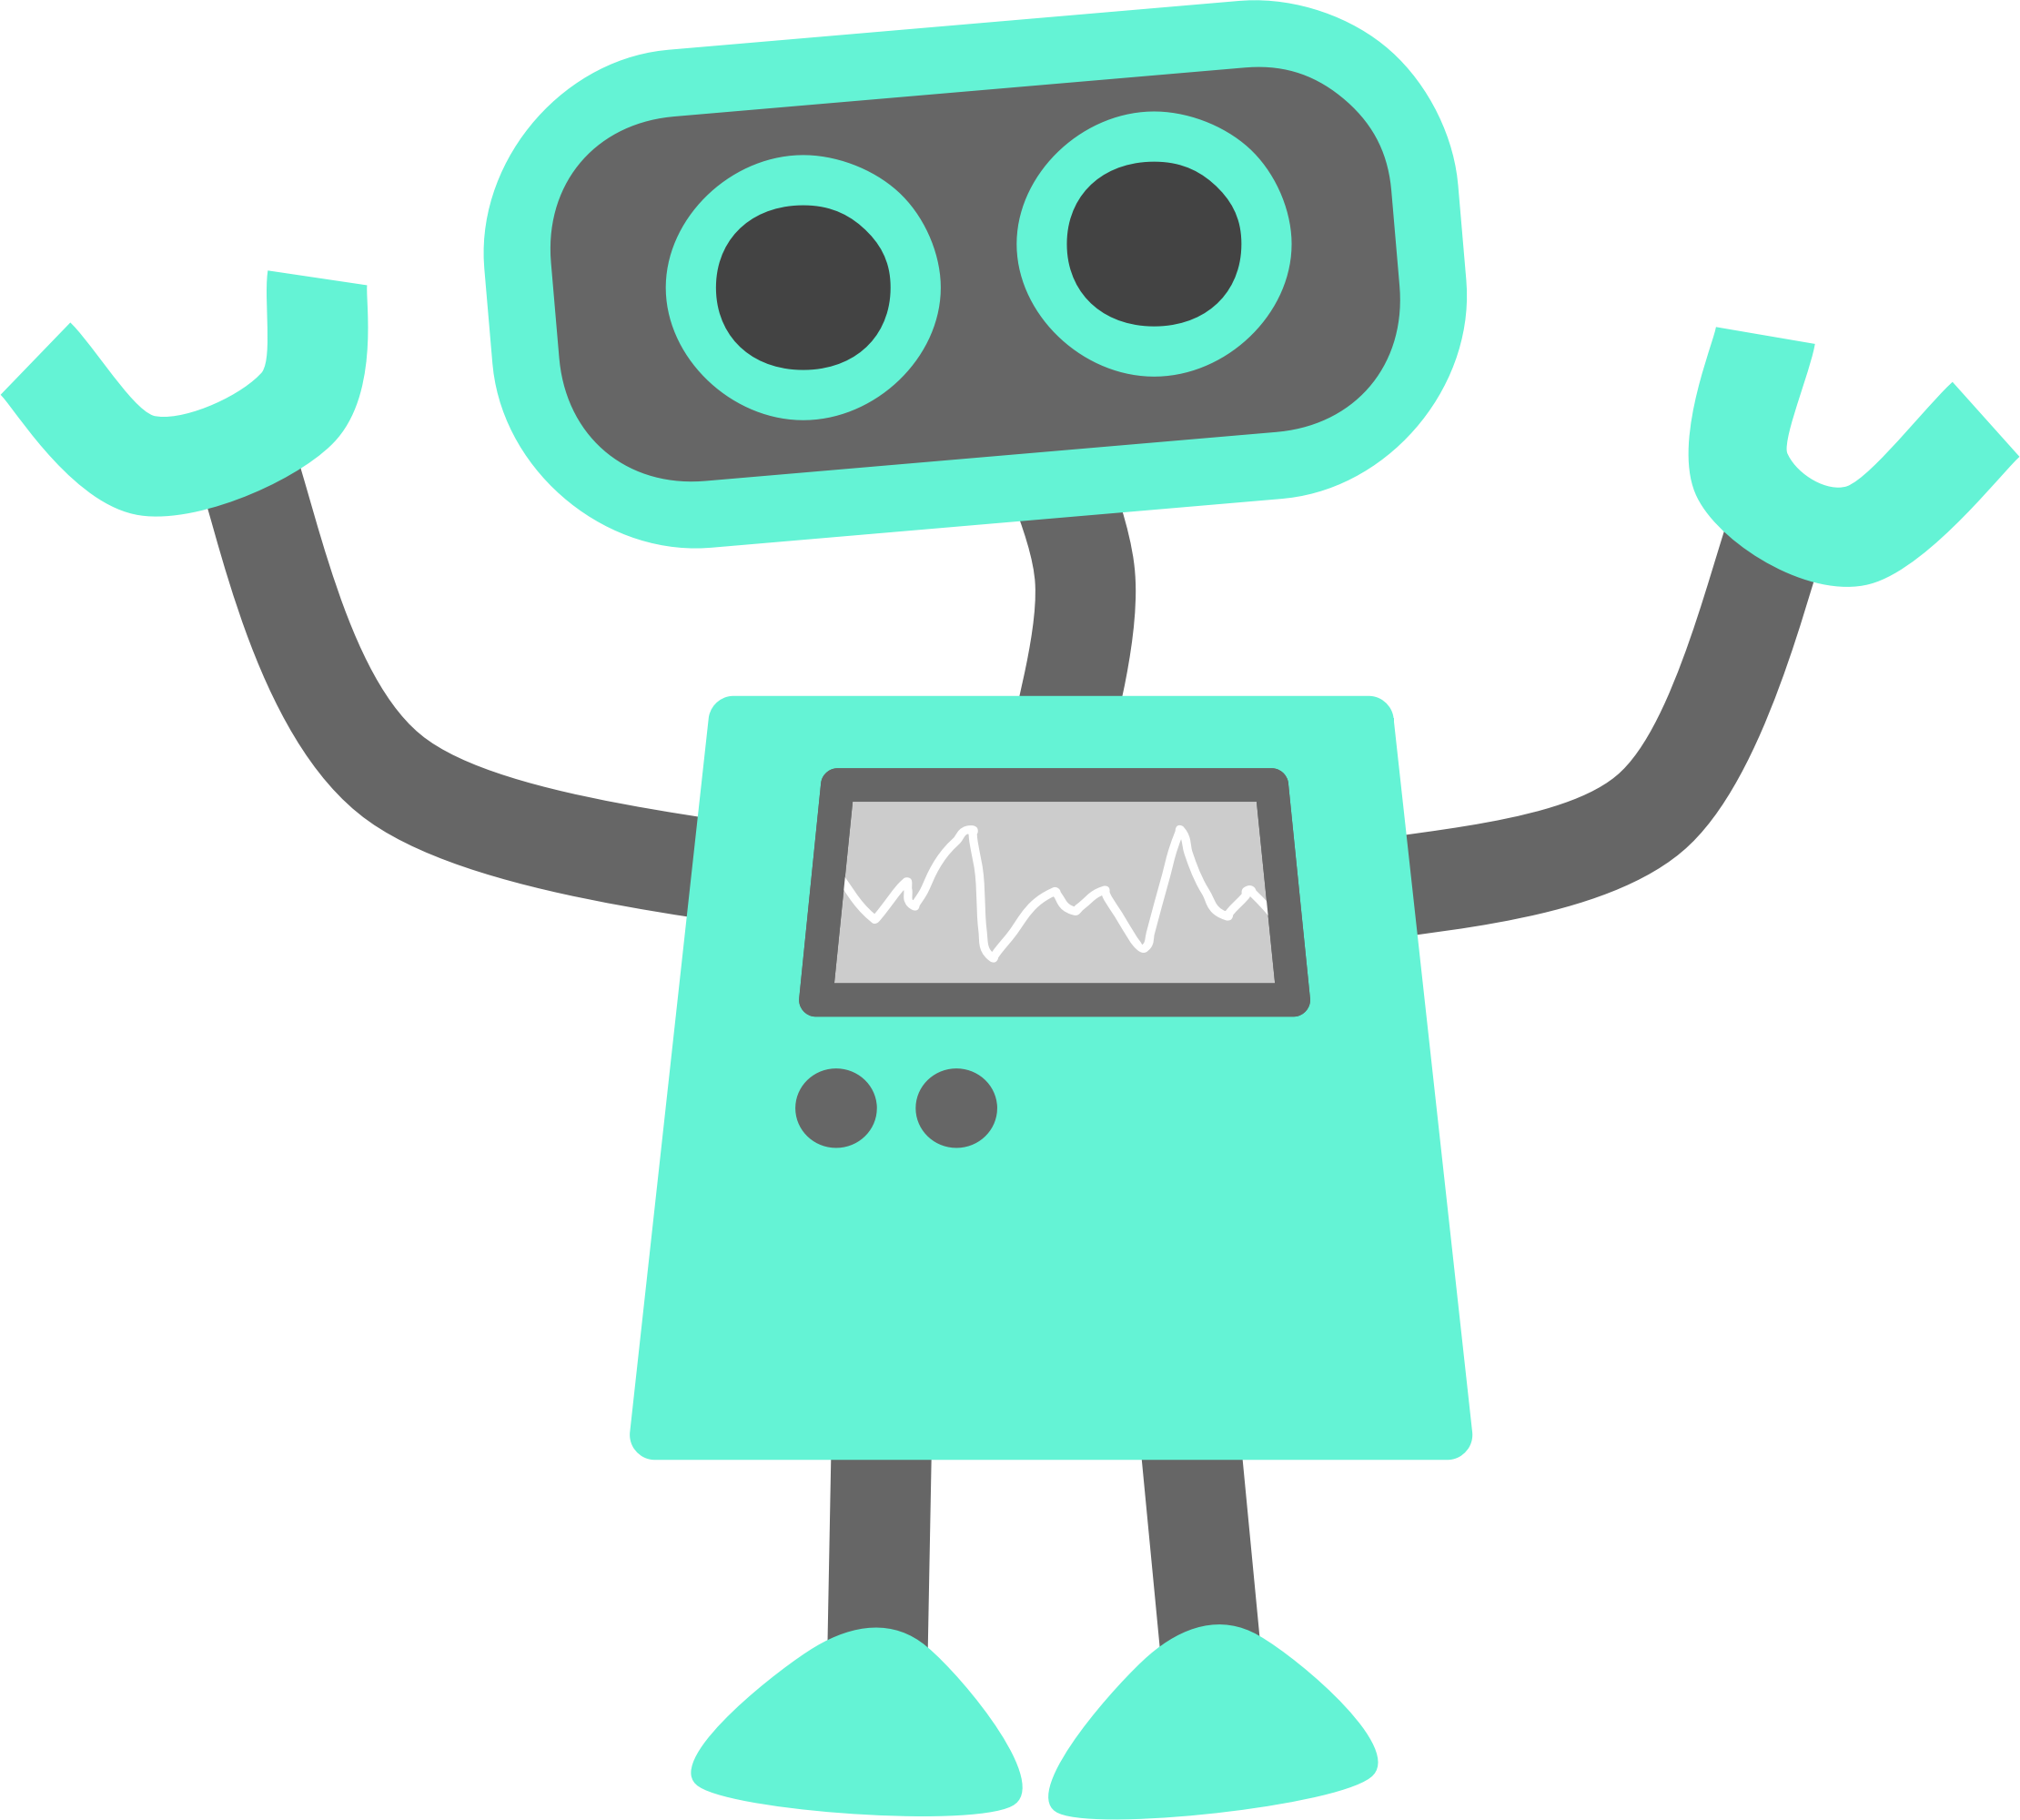 Robot clipart free download on WebStockReview